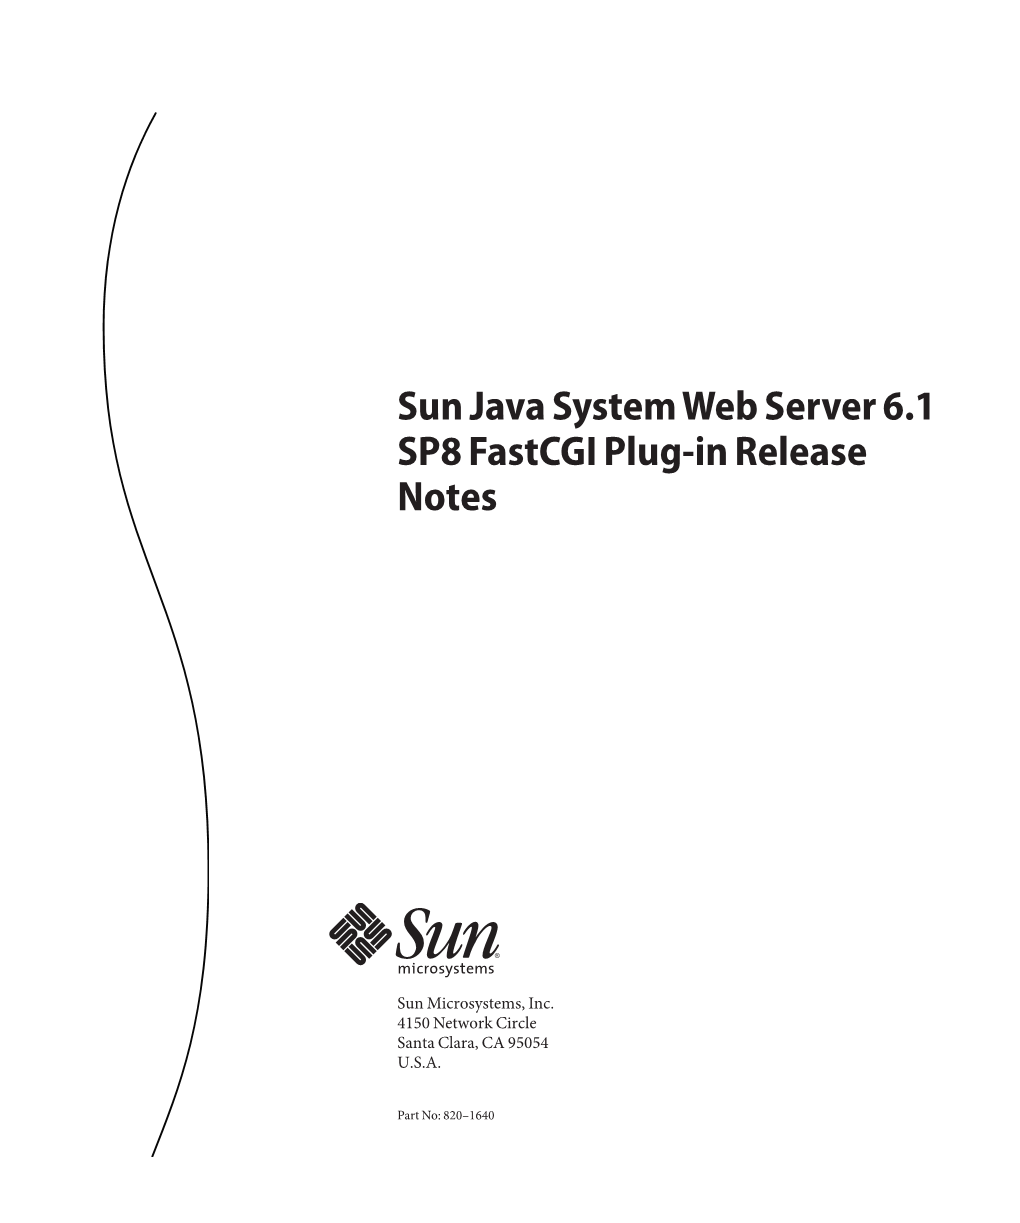 Sun Java System Web Server 6.1 SP8 Fastcgi Plug-In Release Notes